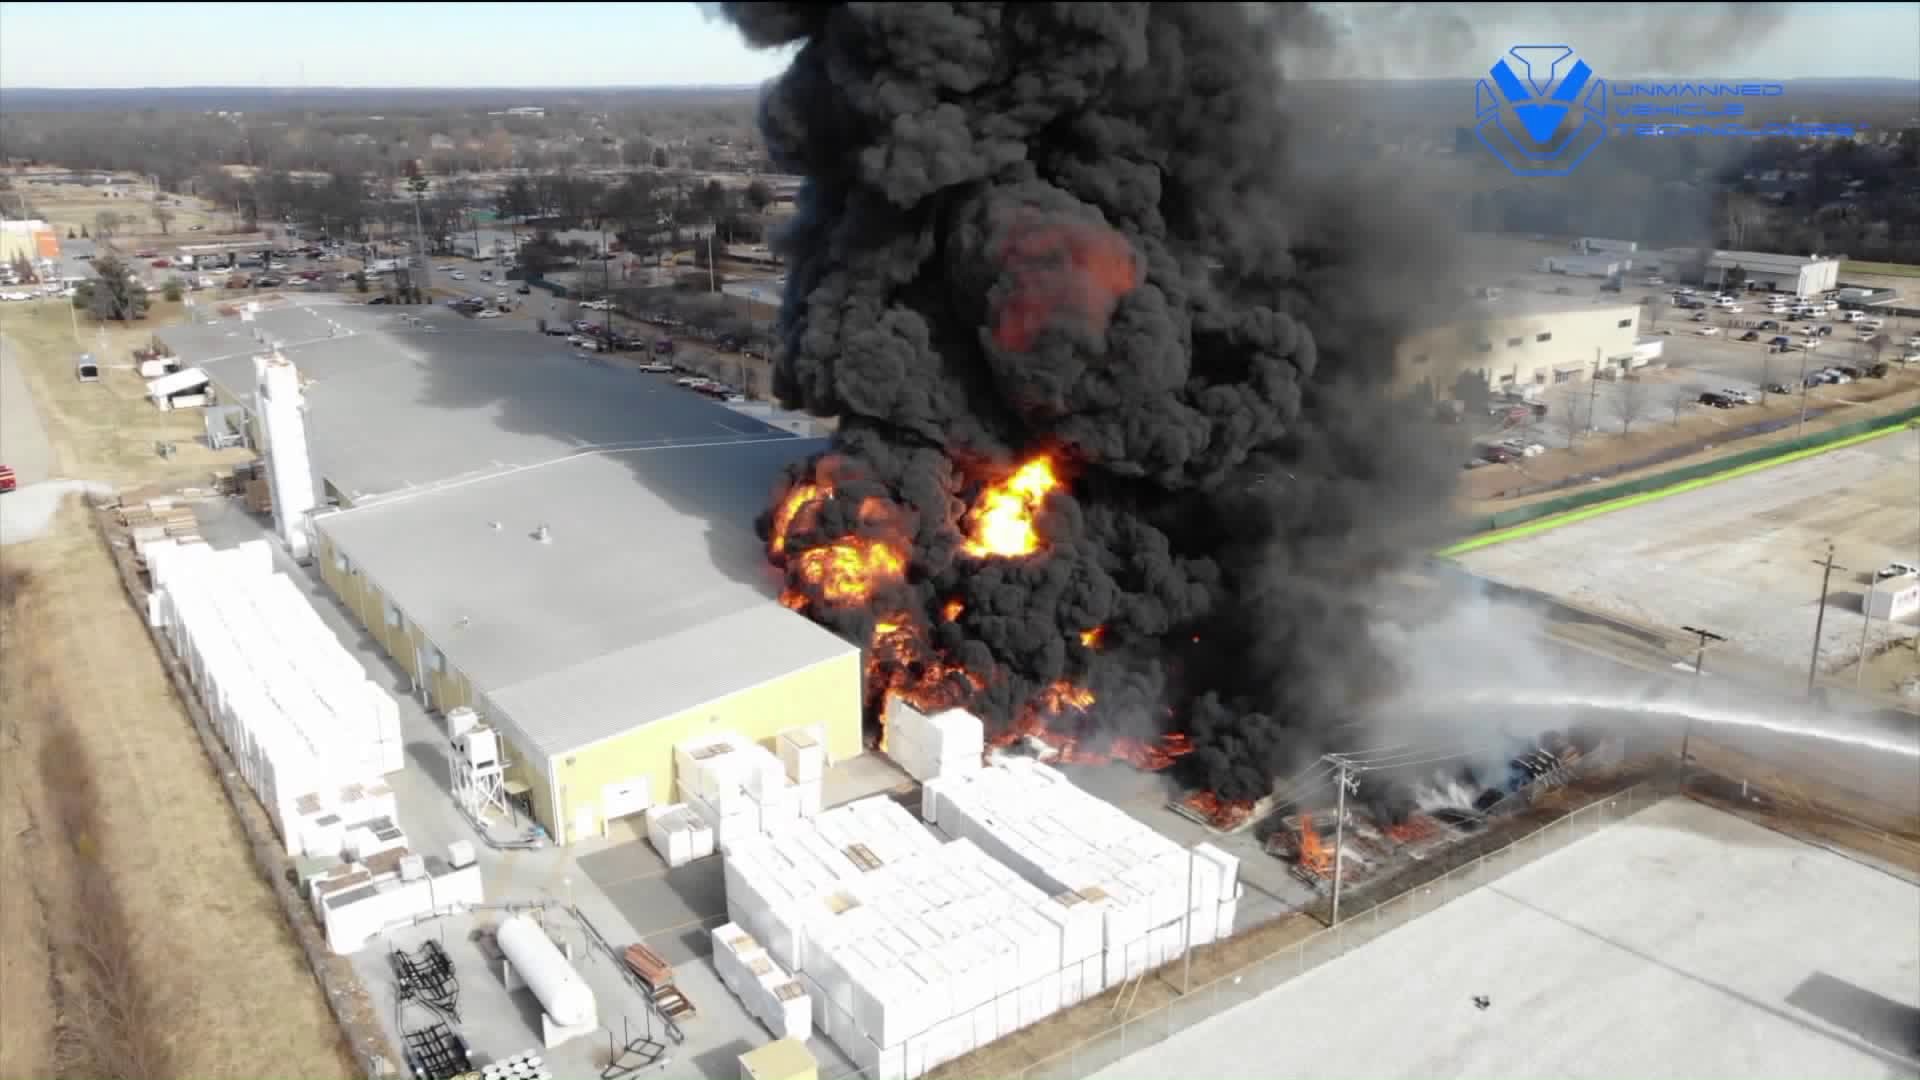 Bentonville Fire Marshal: Electrical Pole Could Have Sparked Massive Plant Fire